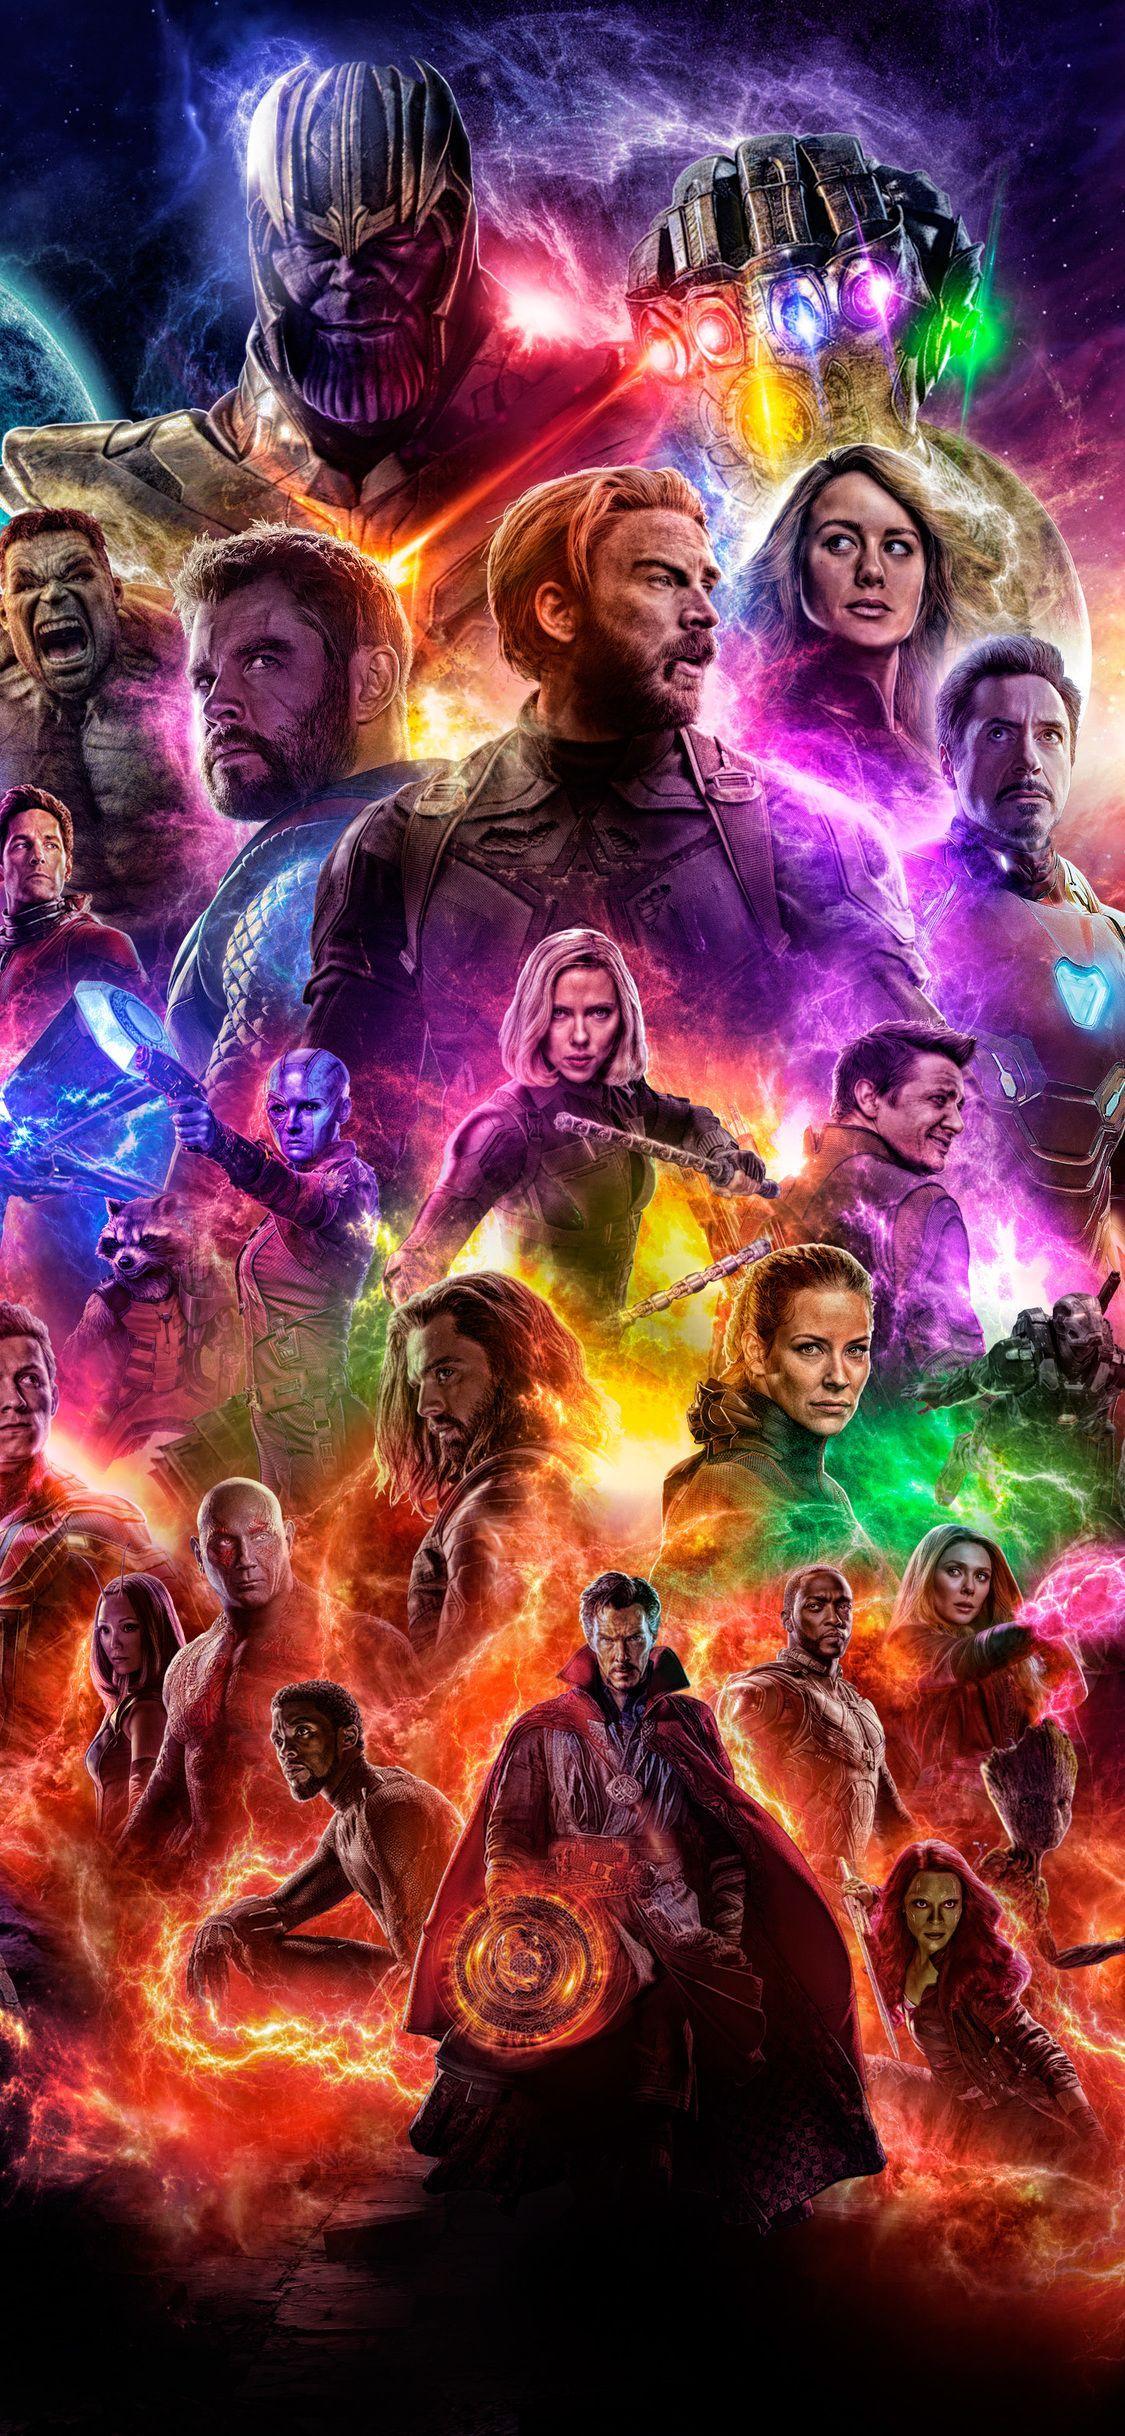 Avengers Infinity War And Endgame Poster HD Superheroes 4k Wallpapers  Images Backgrounds Photos and Pictures